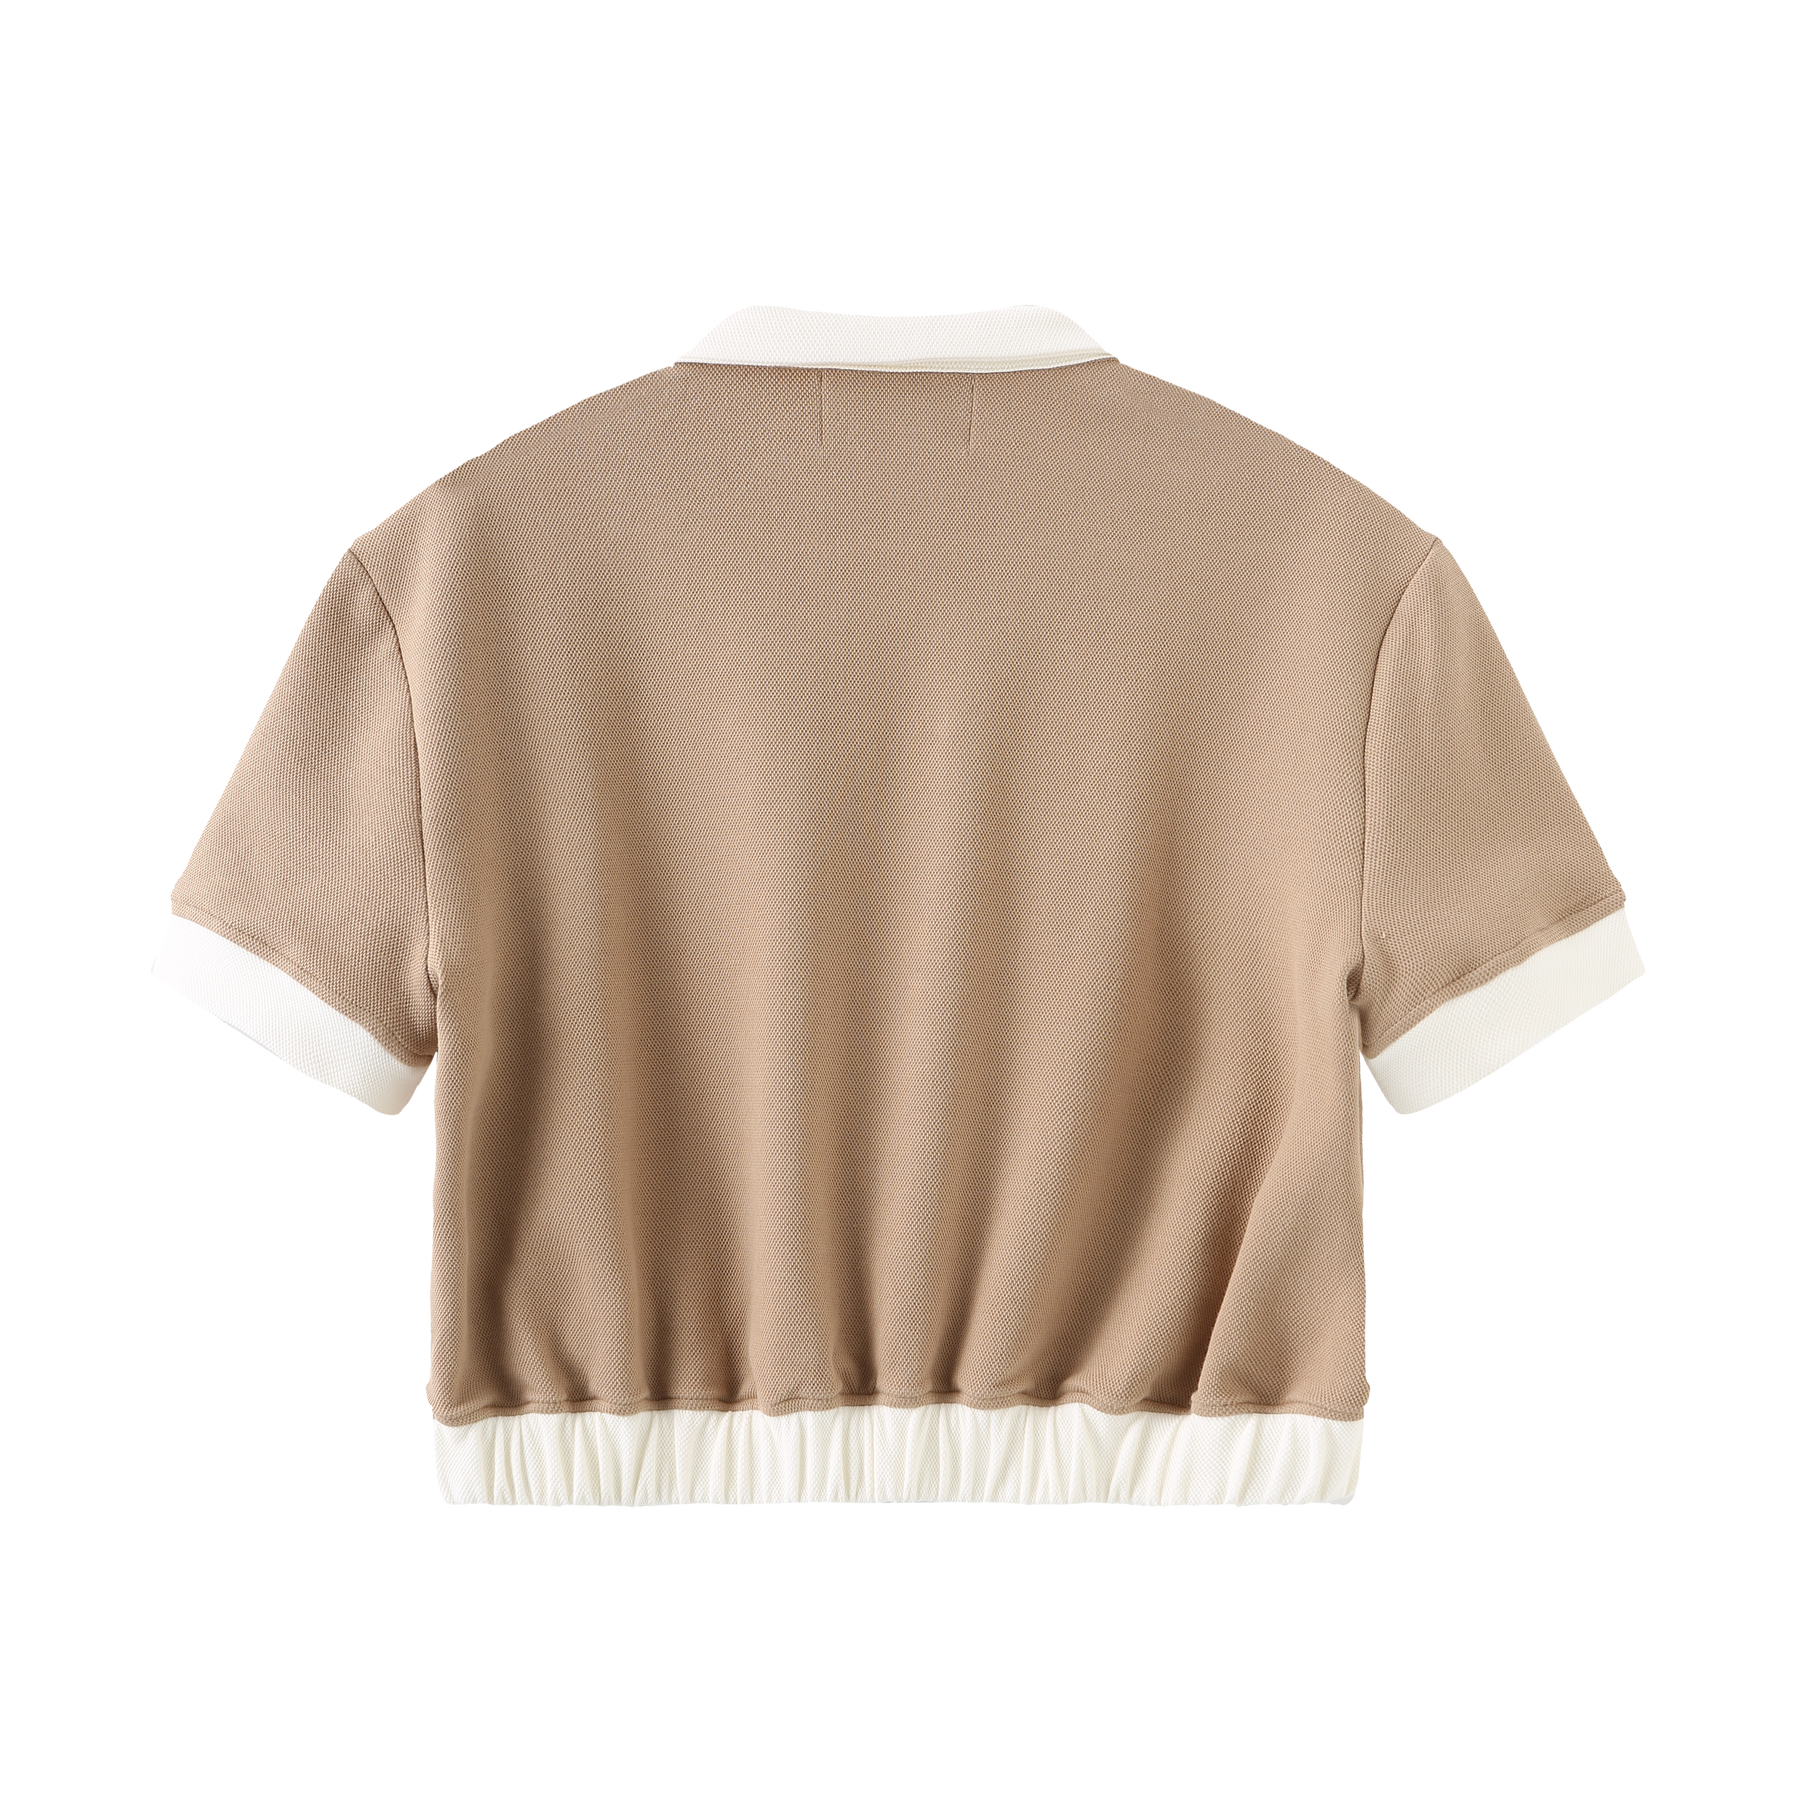 ICON Patched Cropped Short Sleeve Top - Camel